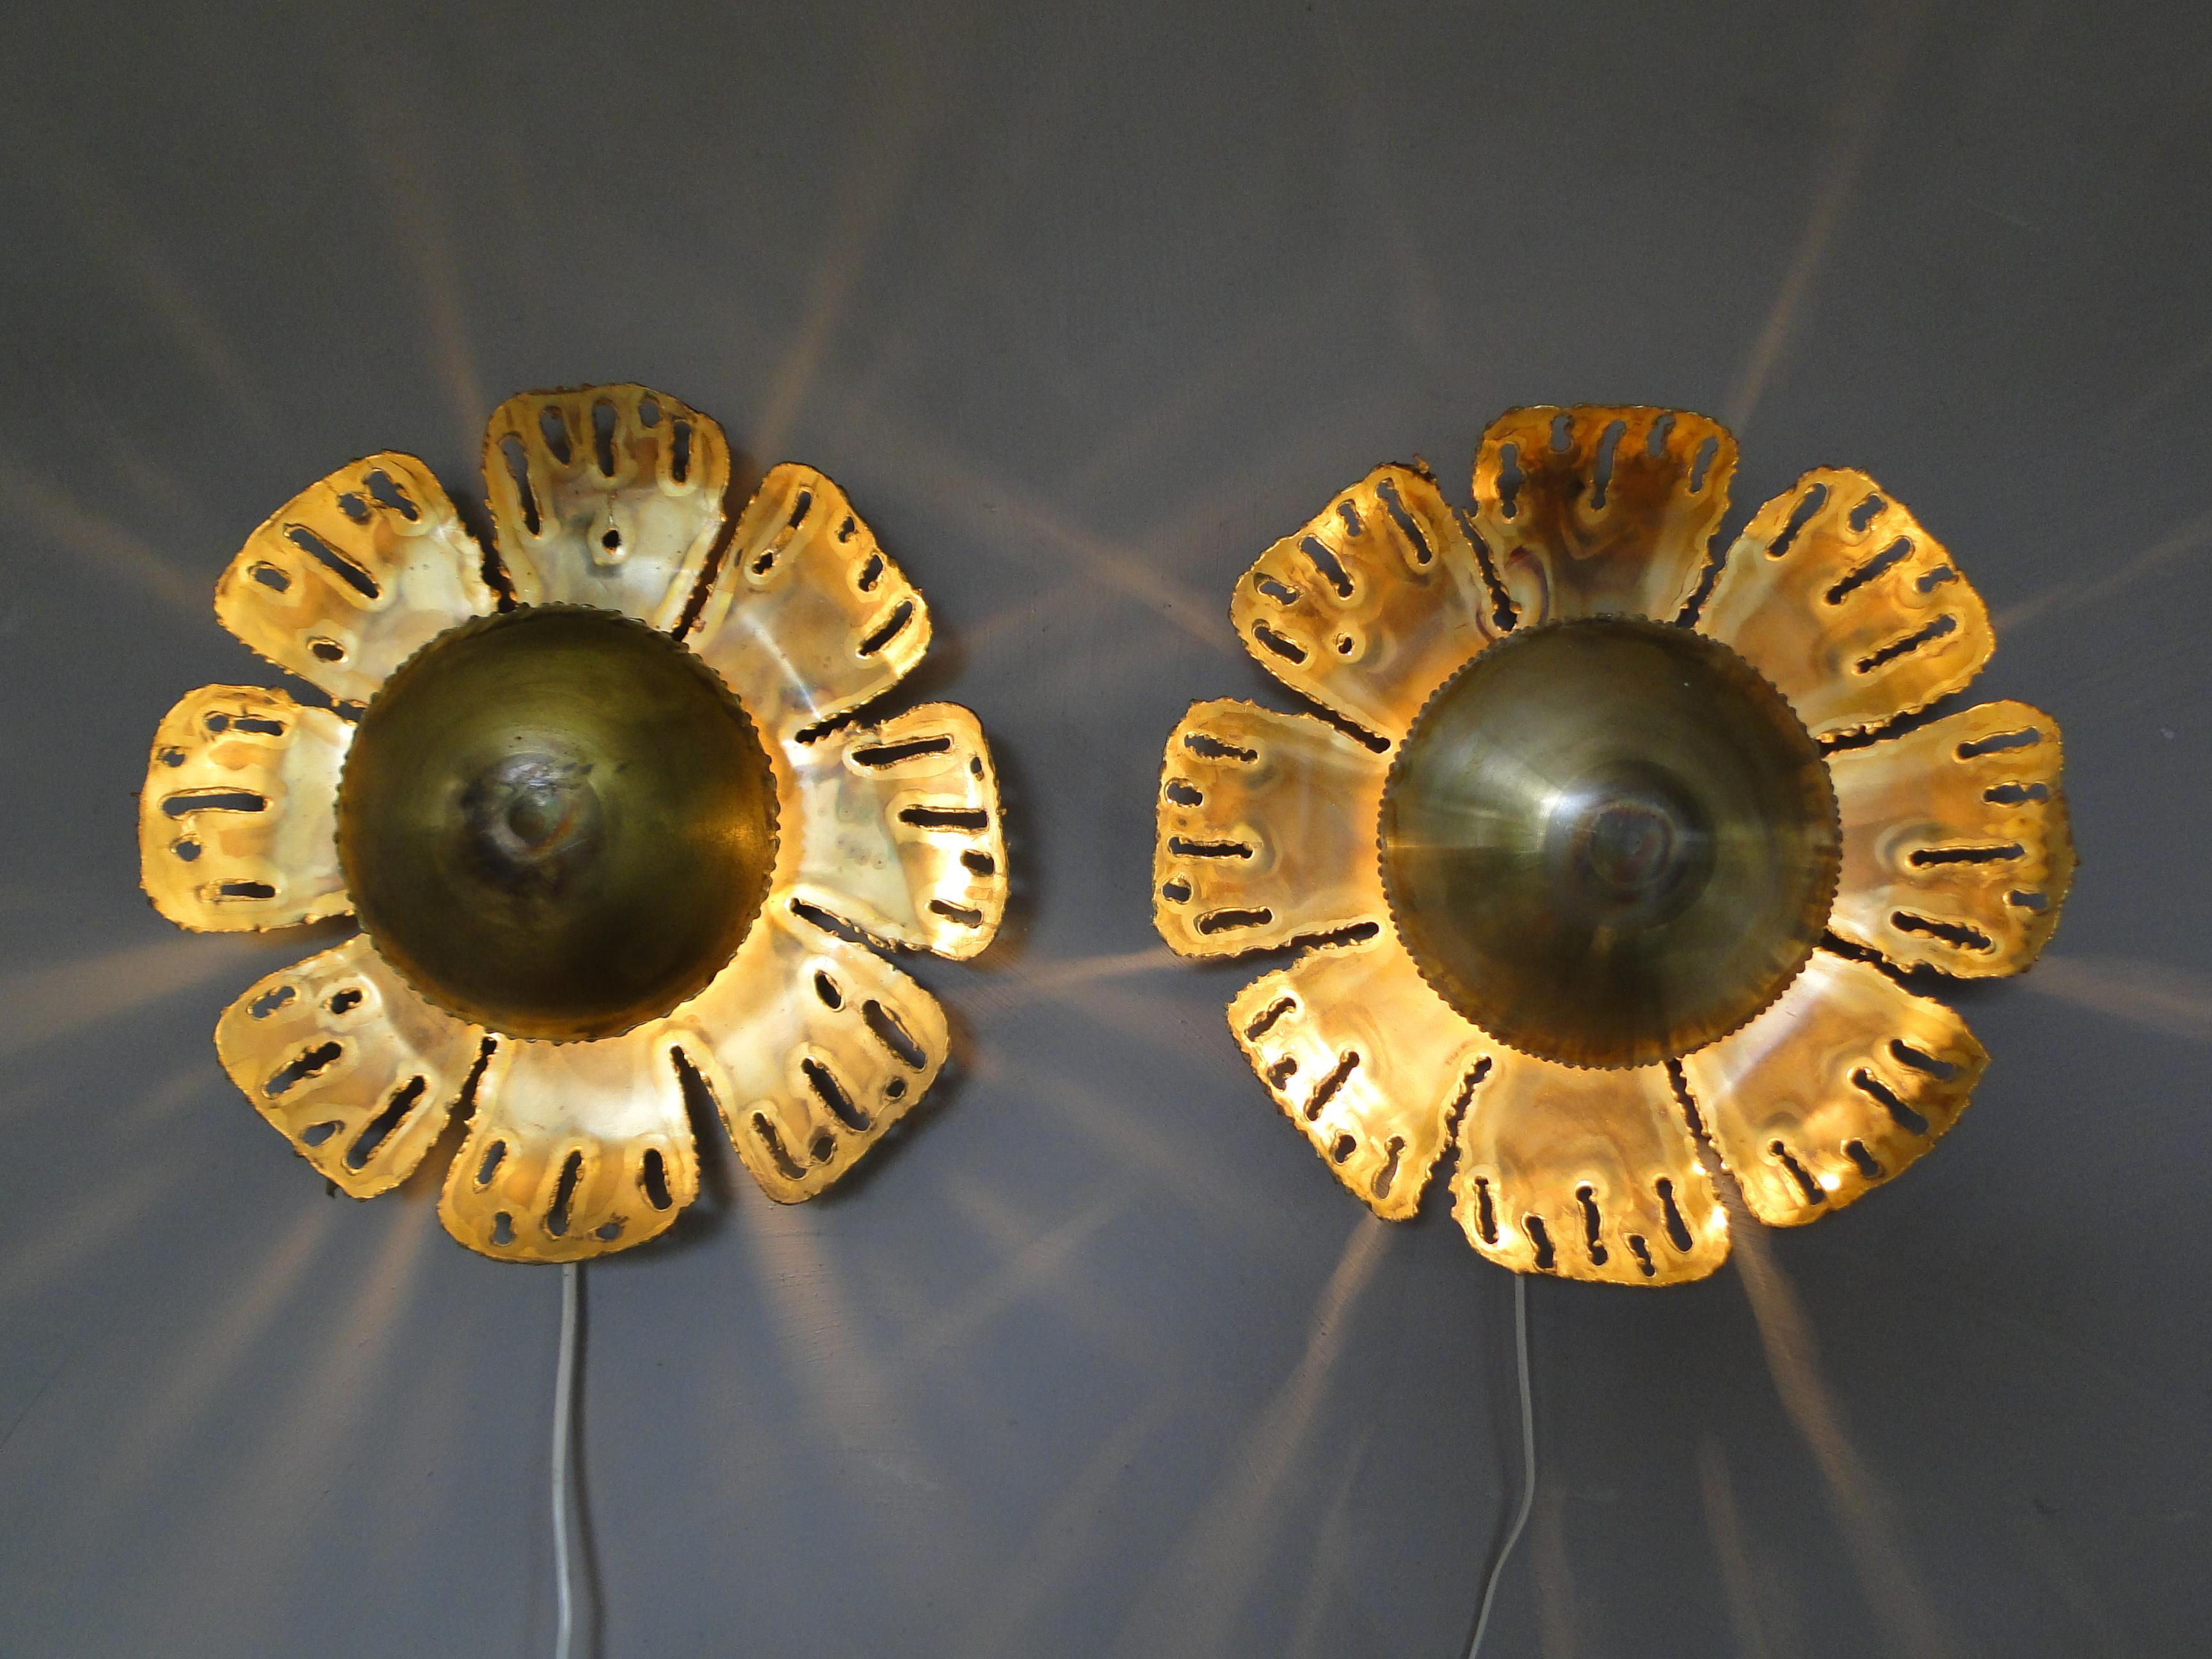 Pair sun-shaped brass wall lamps designed by Svend Aage Holm Sørensen in the 1960s. Produced by his company Holm Sørensen & Co., this eye-catching style  is a true masterpiece and trademark of the Danish designer.

Wall fixings included

The sconces